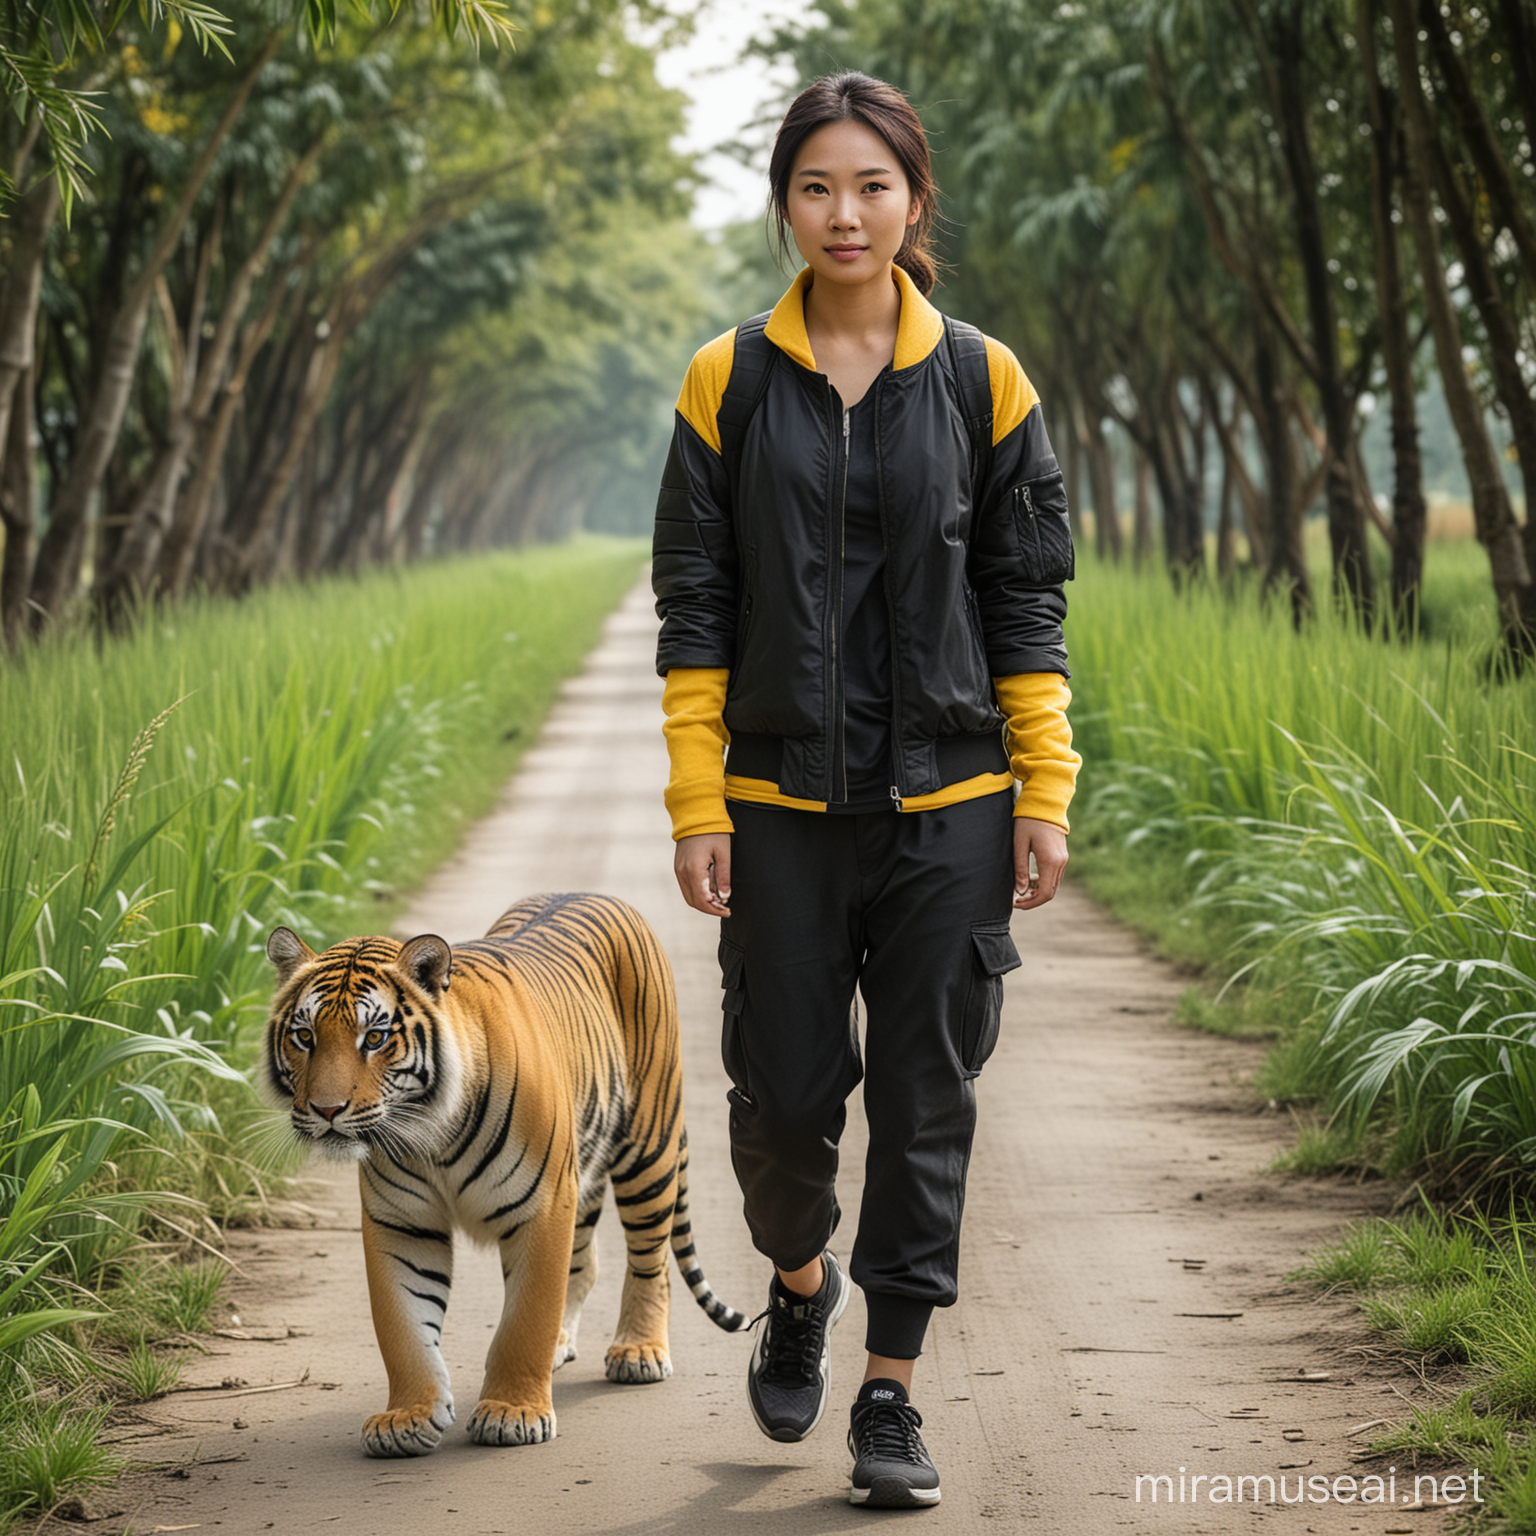 Asian Woman Walking with Fat Tiger Cub on Rice Field Road